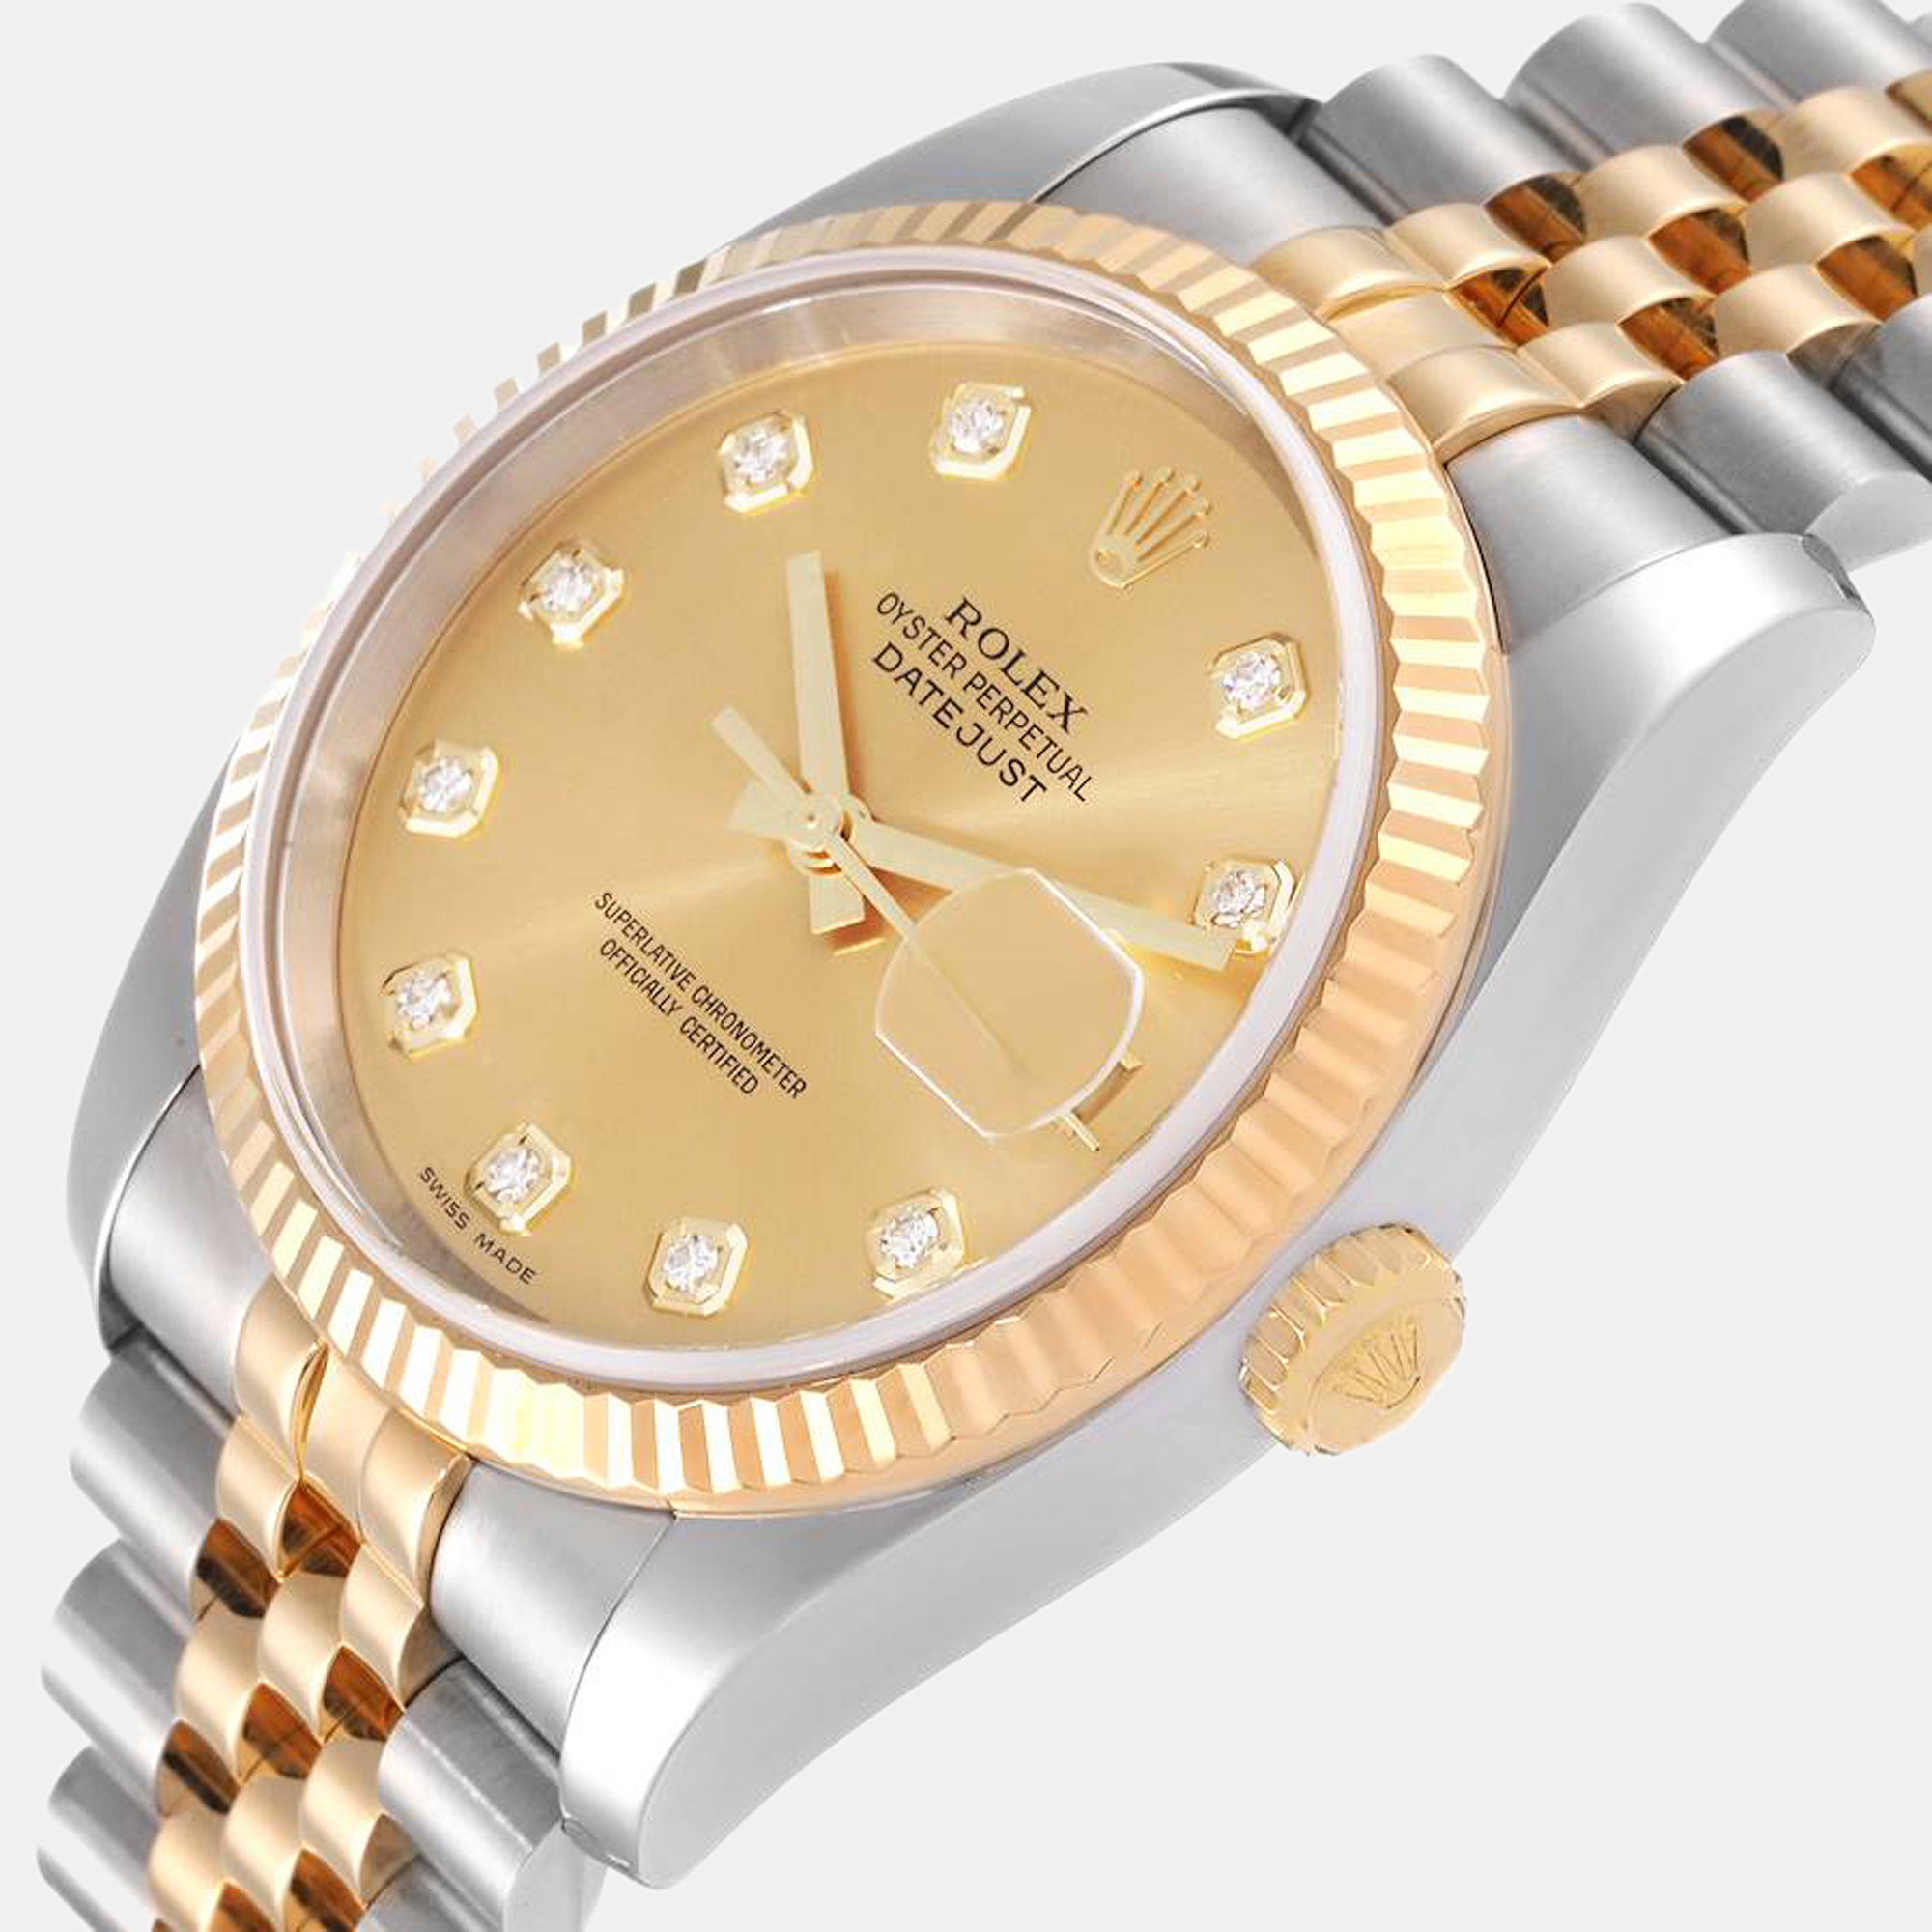 

Rolex Champagne Diamonds 18k Yellow Gold And Stainless Steel Datejust 116233 Automatic Men's Wristwatch 36 mm